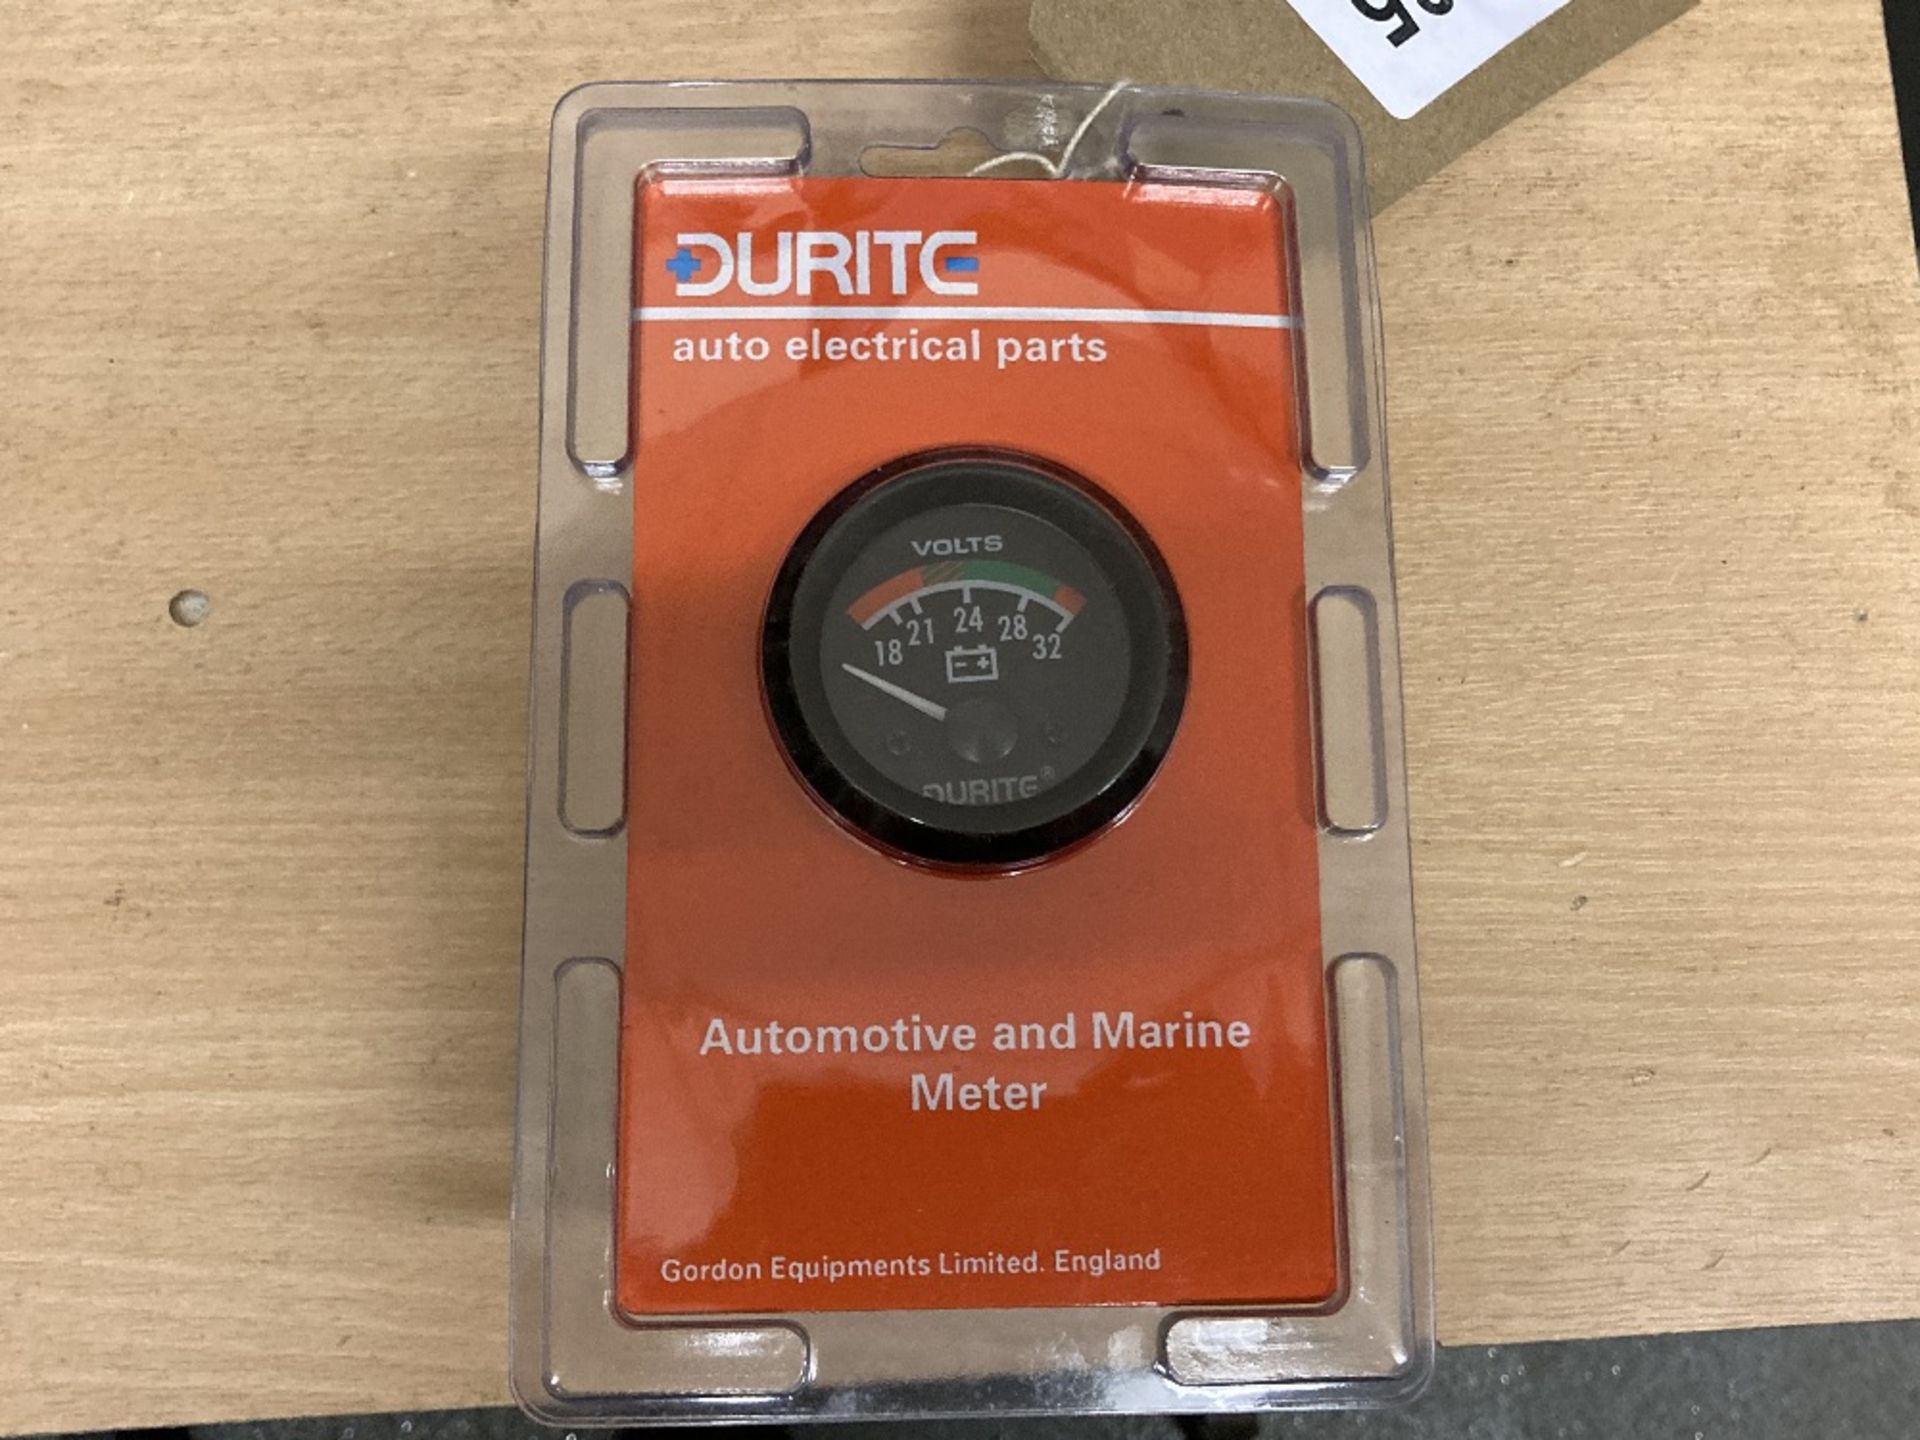 Approximately 10 boxes of Durite 0-523-72 Automotive and Marine Meters - Image 5 of 6